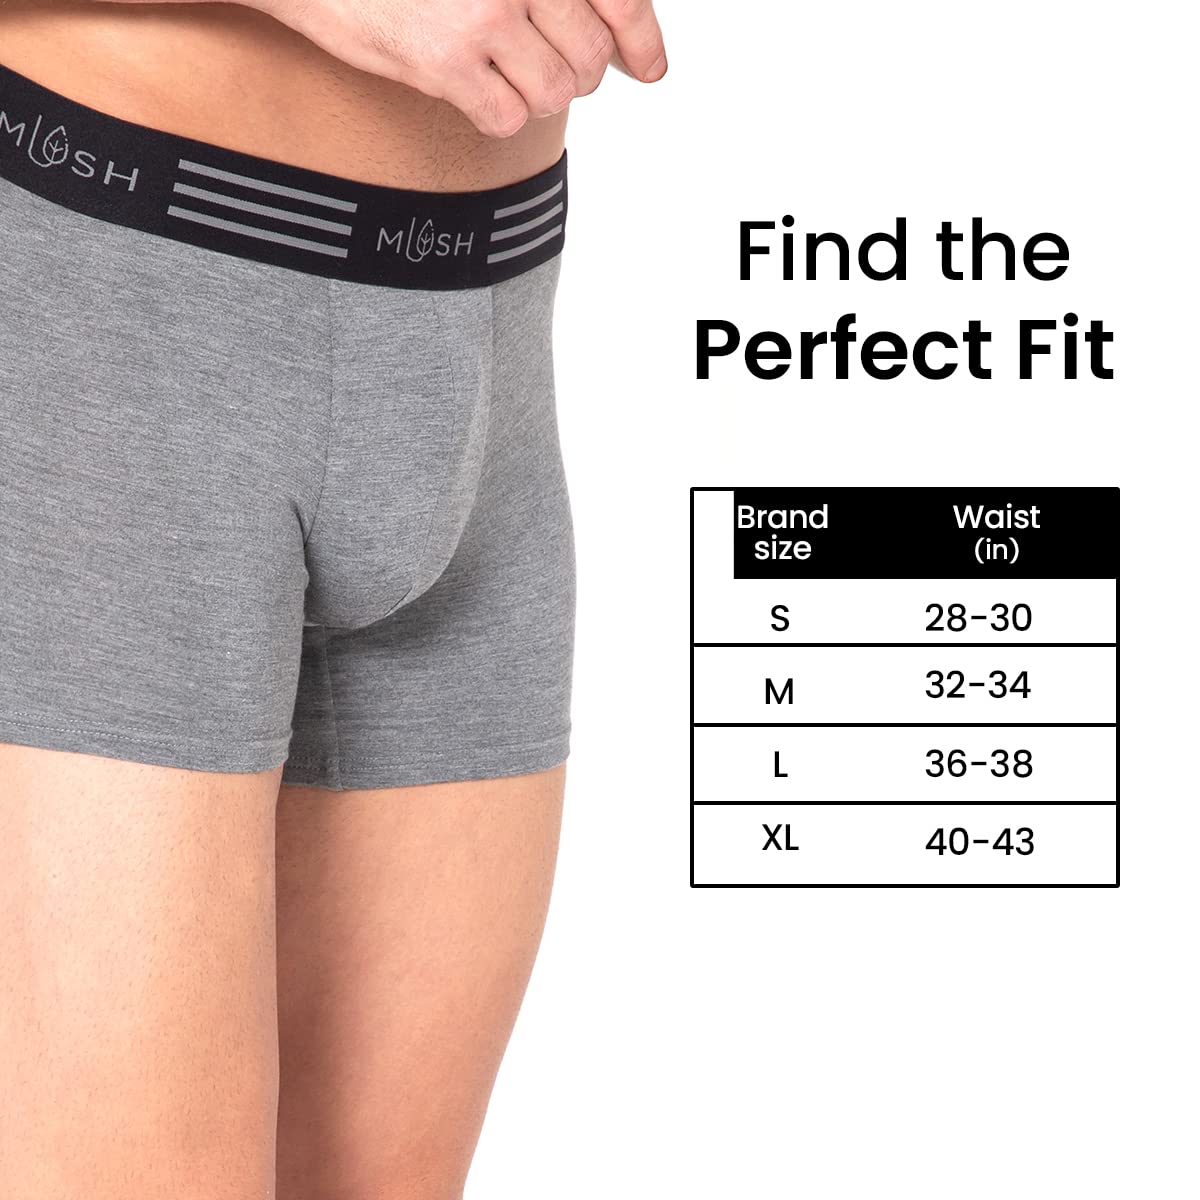 Mush Ultra Soft, Breathable, Feather Light Men's Bamboo Trunk || Naturally Anti-Odor and Anti-Microbial Bamboo Innerwear Pack of 3 (L, Grey White and Black)